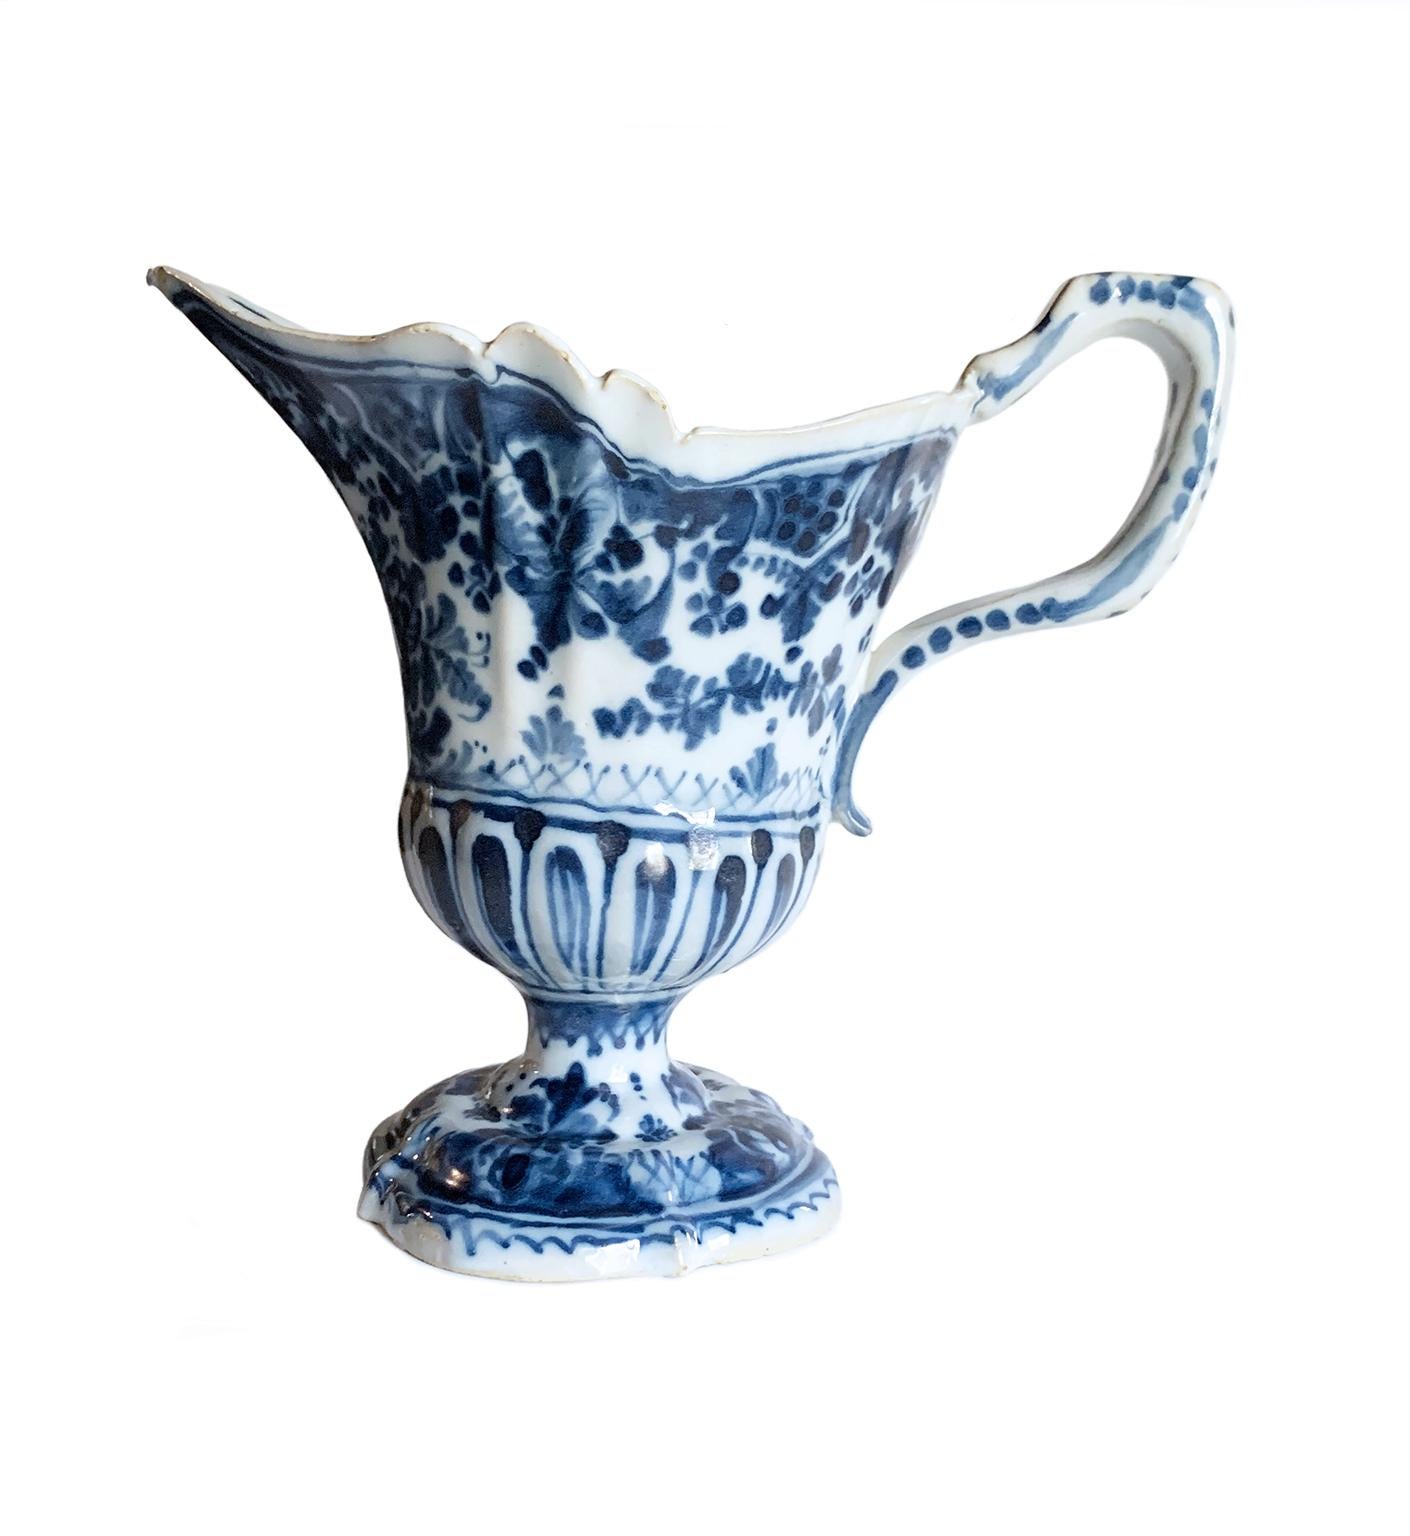 Majolica pitcher
Antonio Maria Coppellotti Manufacture
Lodi, circa 1735 
Majolica decorated in cobalt blue monochrome
It measures 7.36 in hight x 8.07 x 4.52 (h 18.7 cm x 20.5 x 11.5)
Weight:  0.859 lb (390 g)

State of conservation: intact, apart